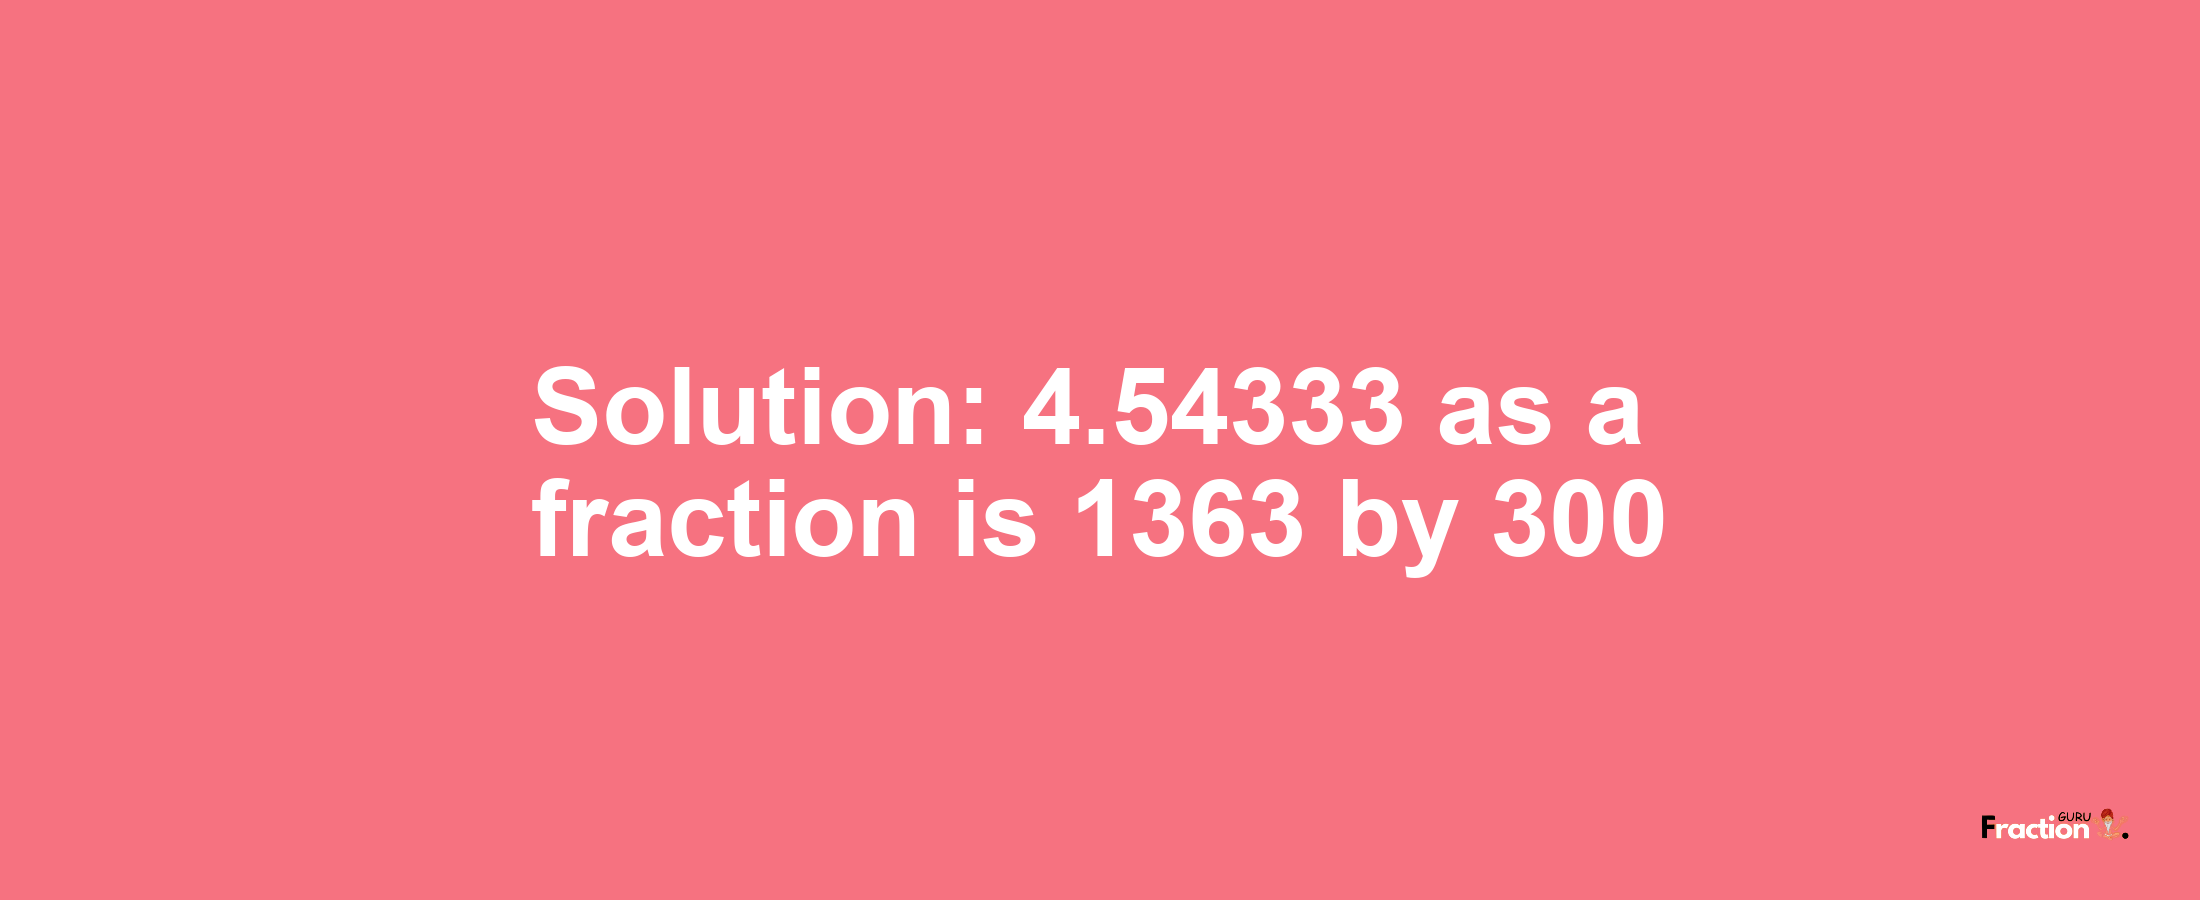 Solution:4.54333 as a fraction is 1363/300